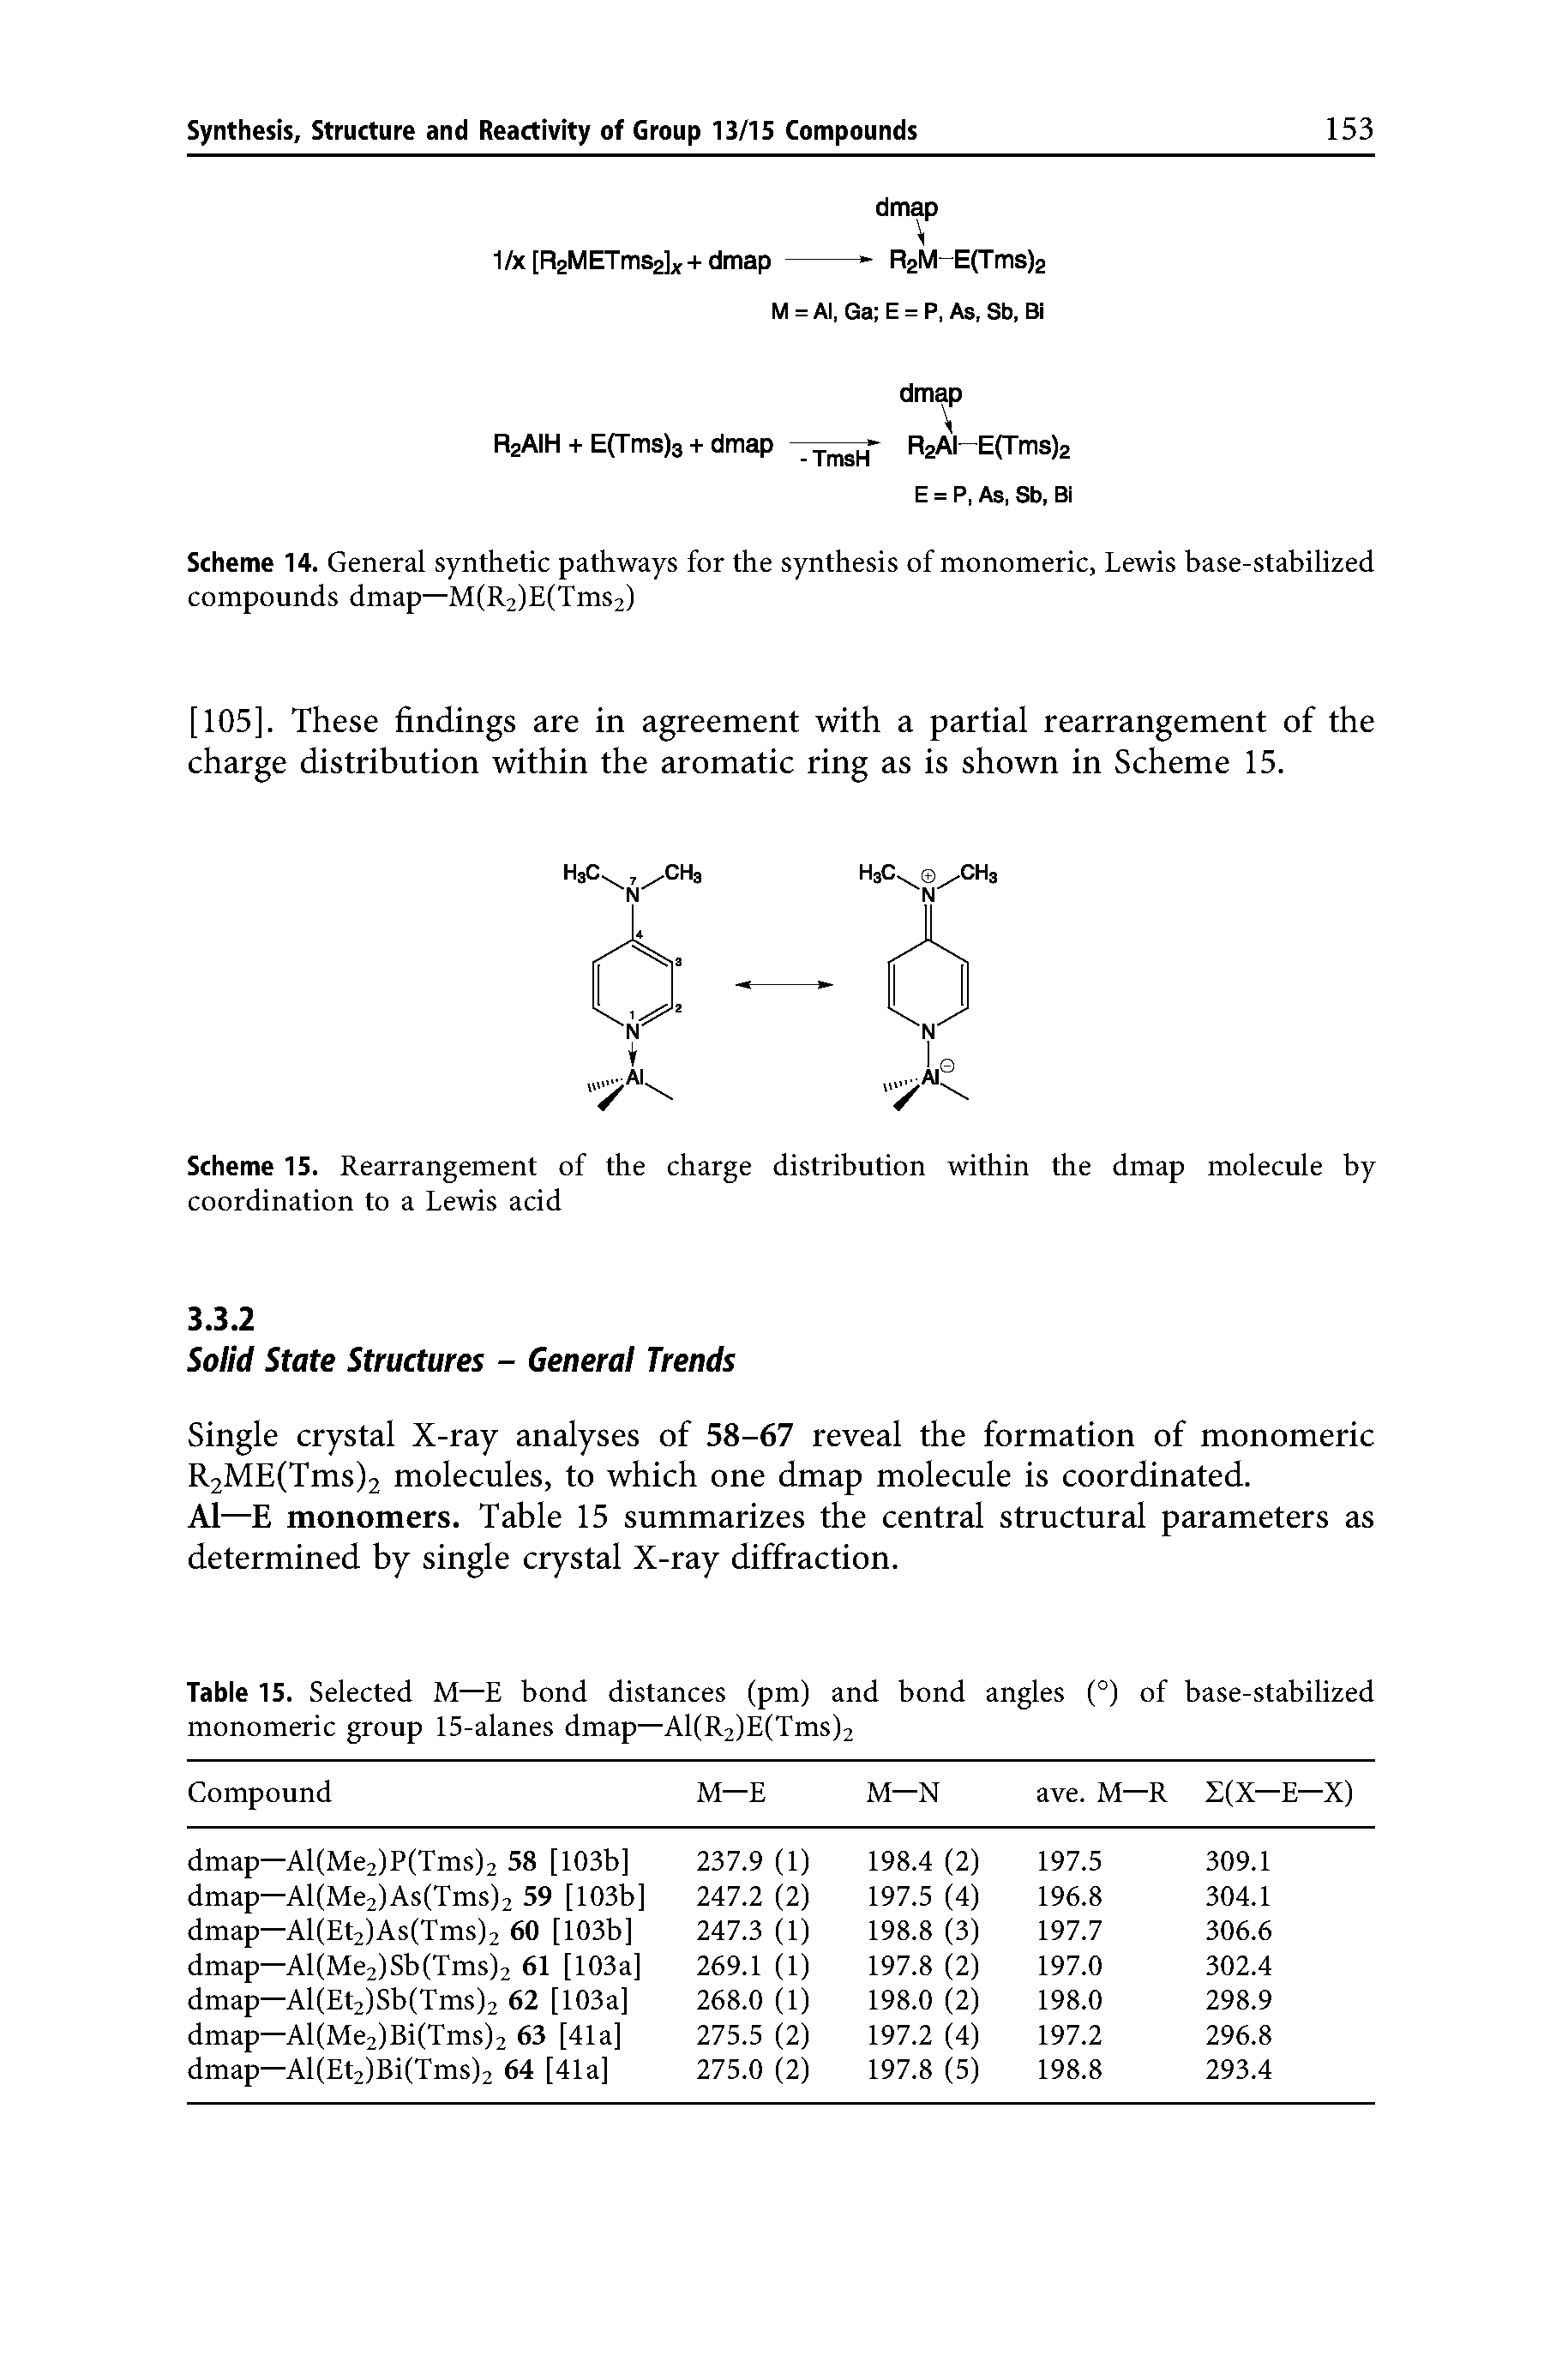 Scheme 14. General synthetic pathways for the synthesis of monomeric, Lewis base-stabilized compounds dmap—M(R2)E(Tms2)...